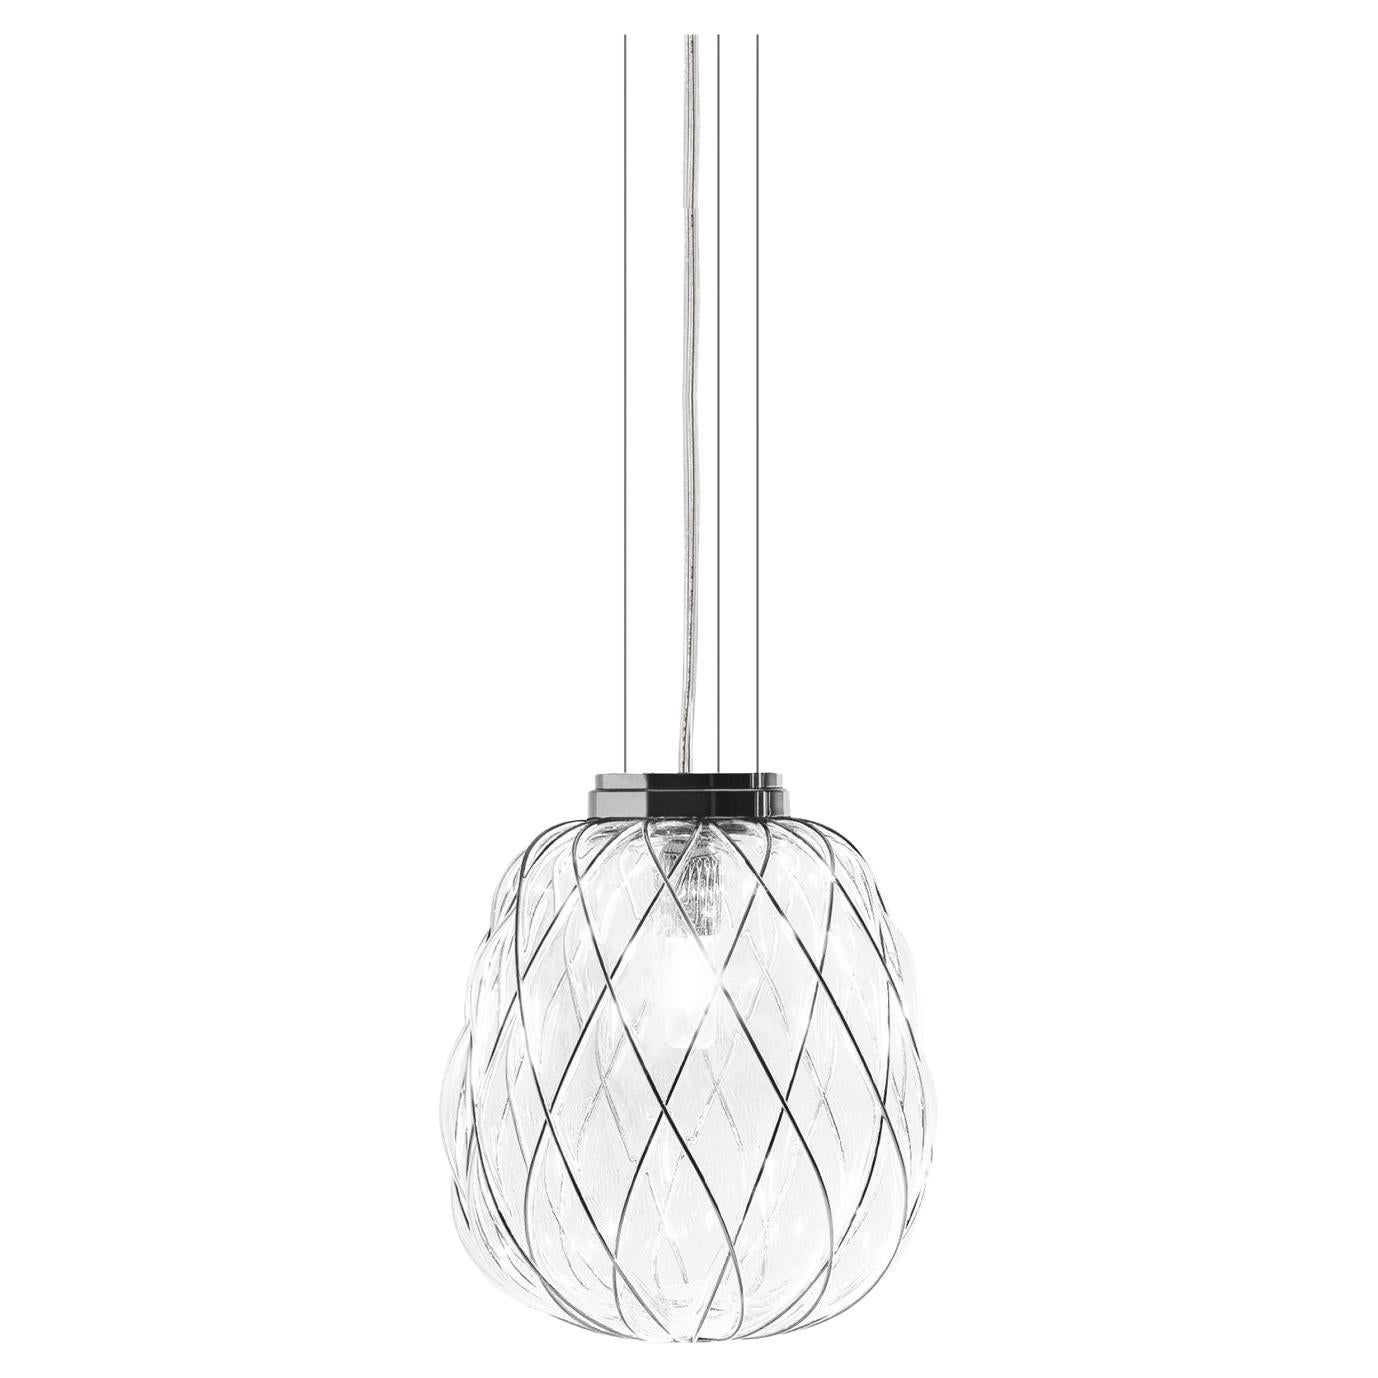 Fontana Arte "Pinecone" Blown Glass Pendant Lamp Designed by Paola Navone For Sale